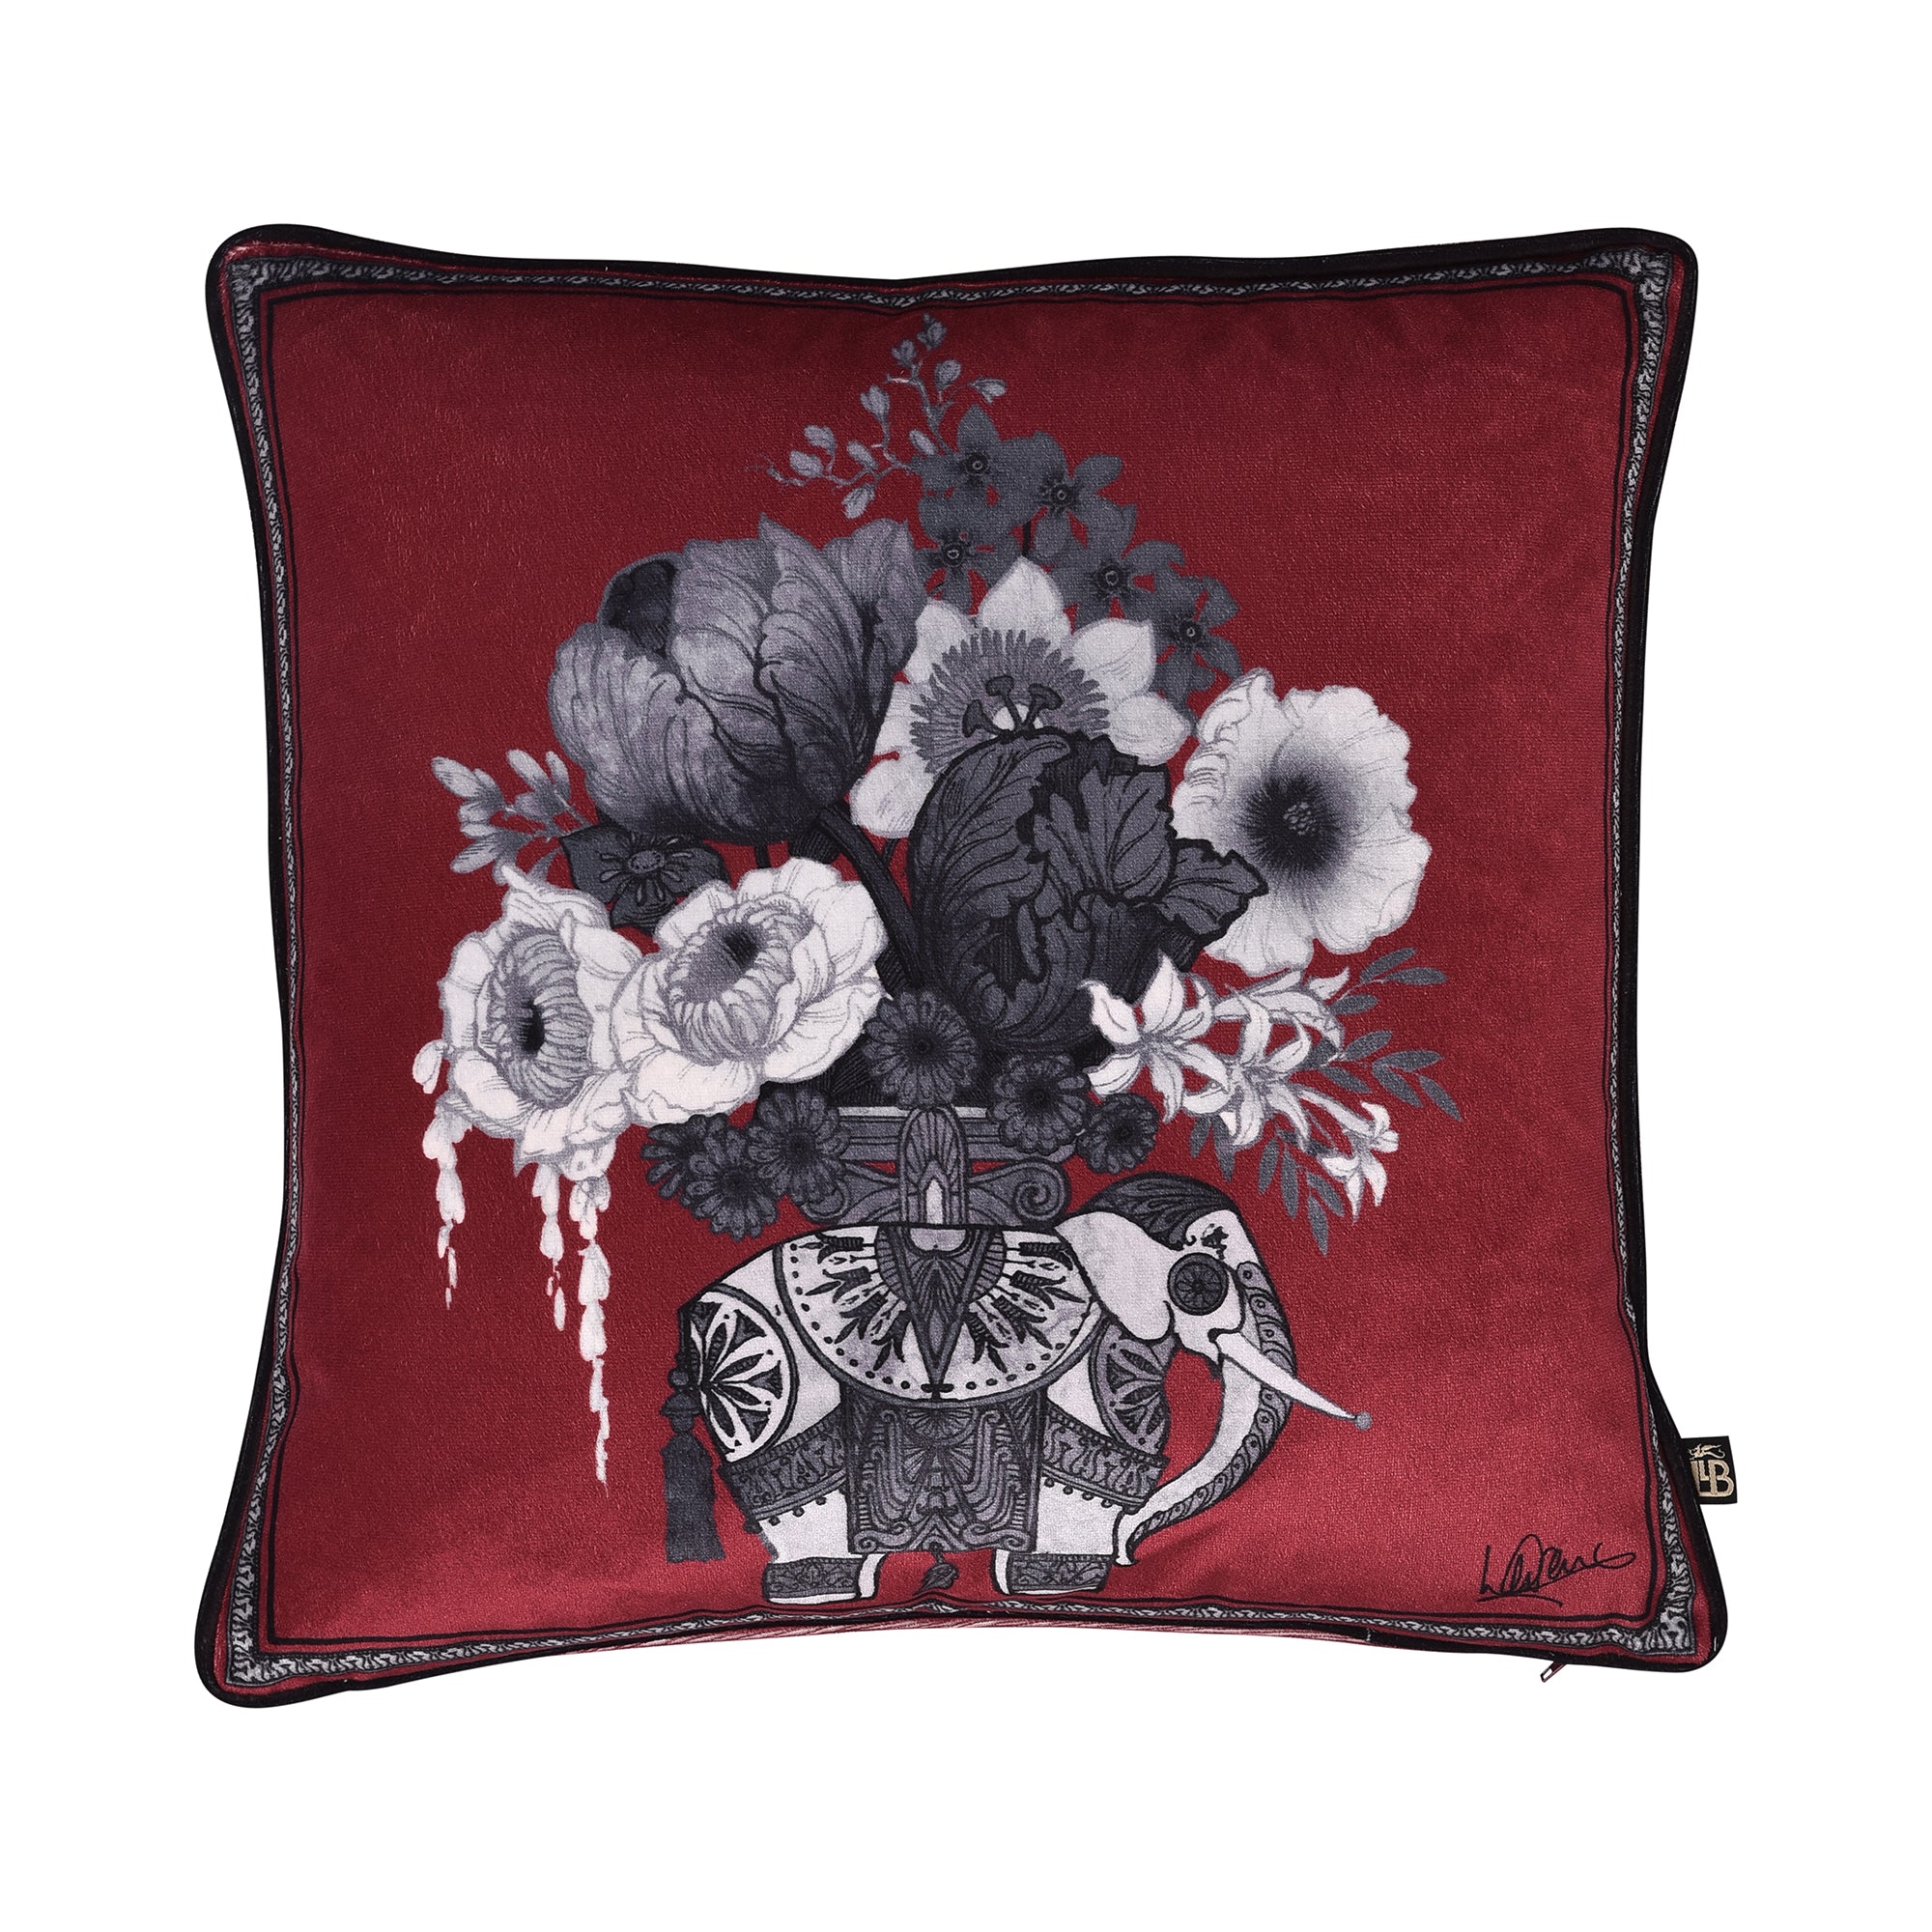 Cushion Cover Generou Elephant by Laurence Llewelyn-Bowen in Claret